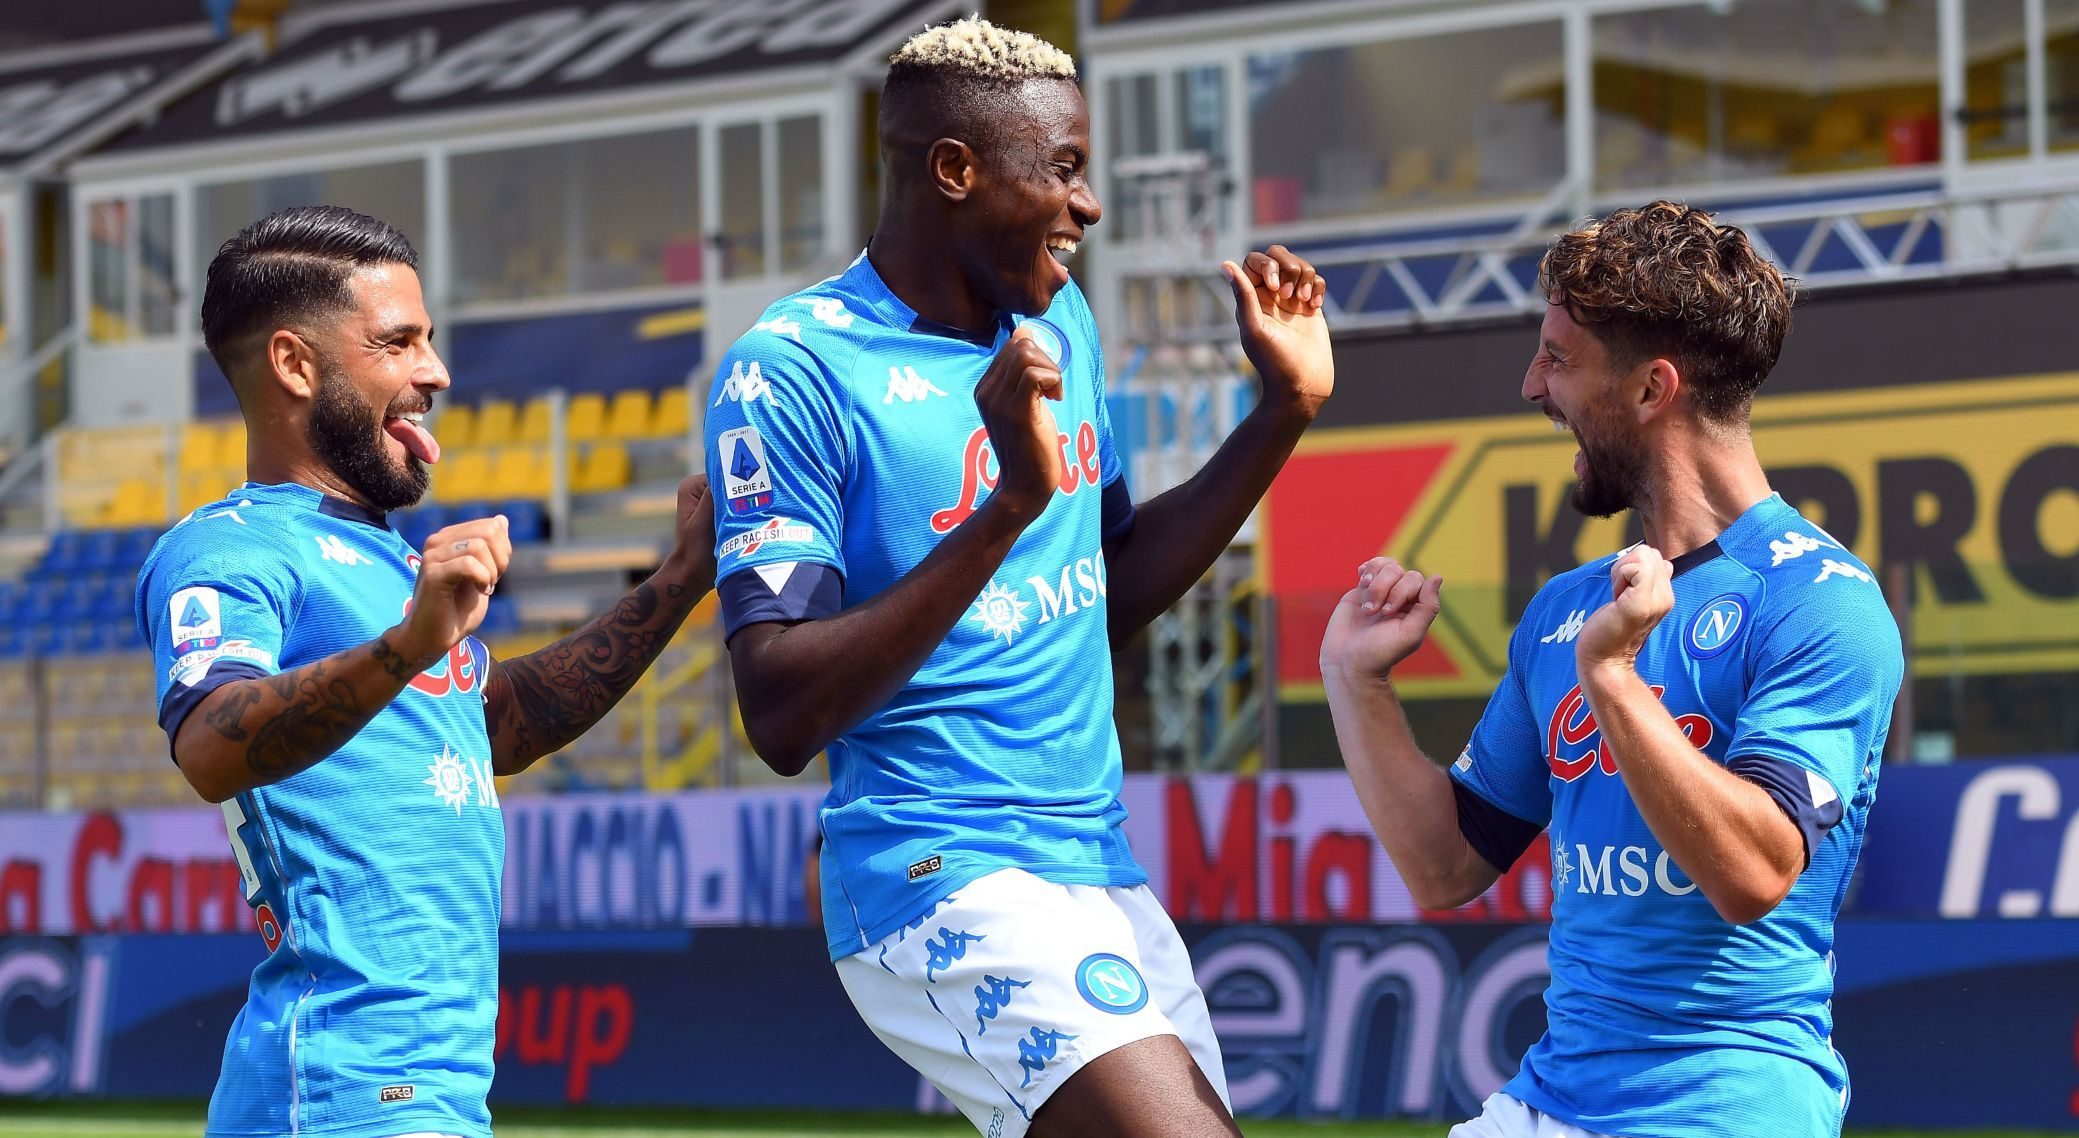 Napoli grabbed the three points in Parma thanks to goals by Dries Mertens and Lorenzo Insigne - the "usual suspects" among Gennaro Gattuso's lineup